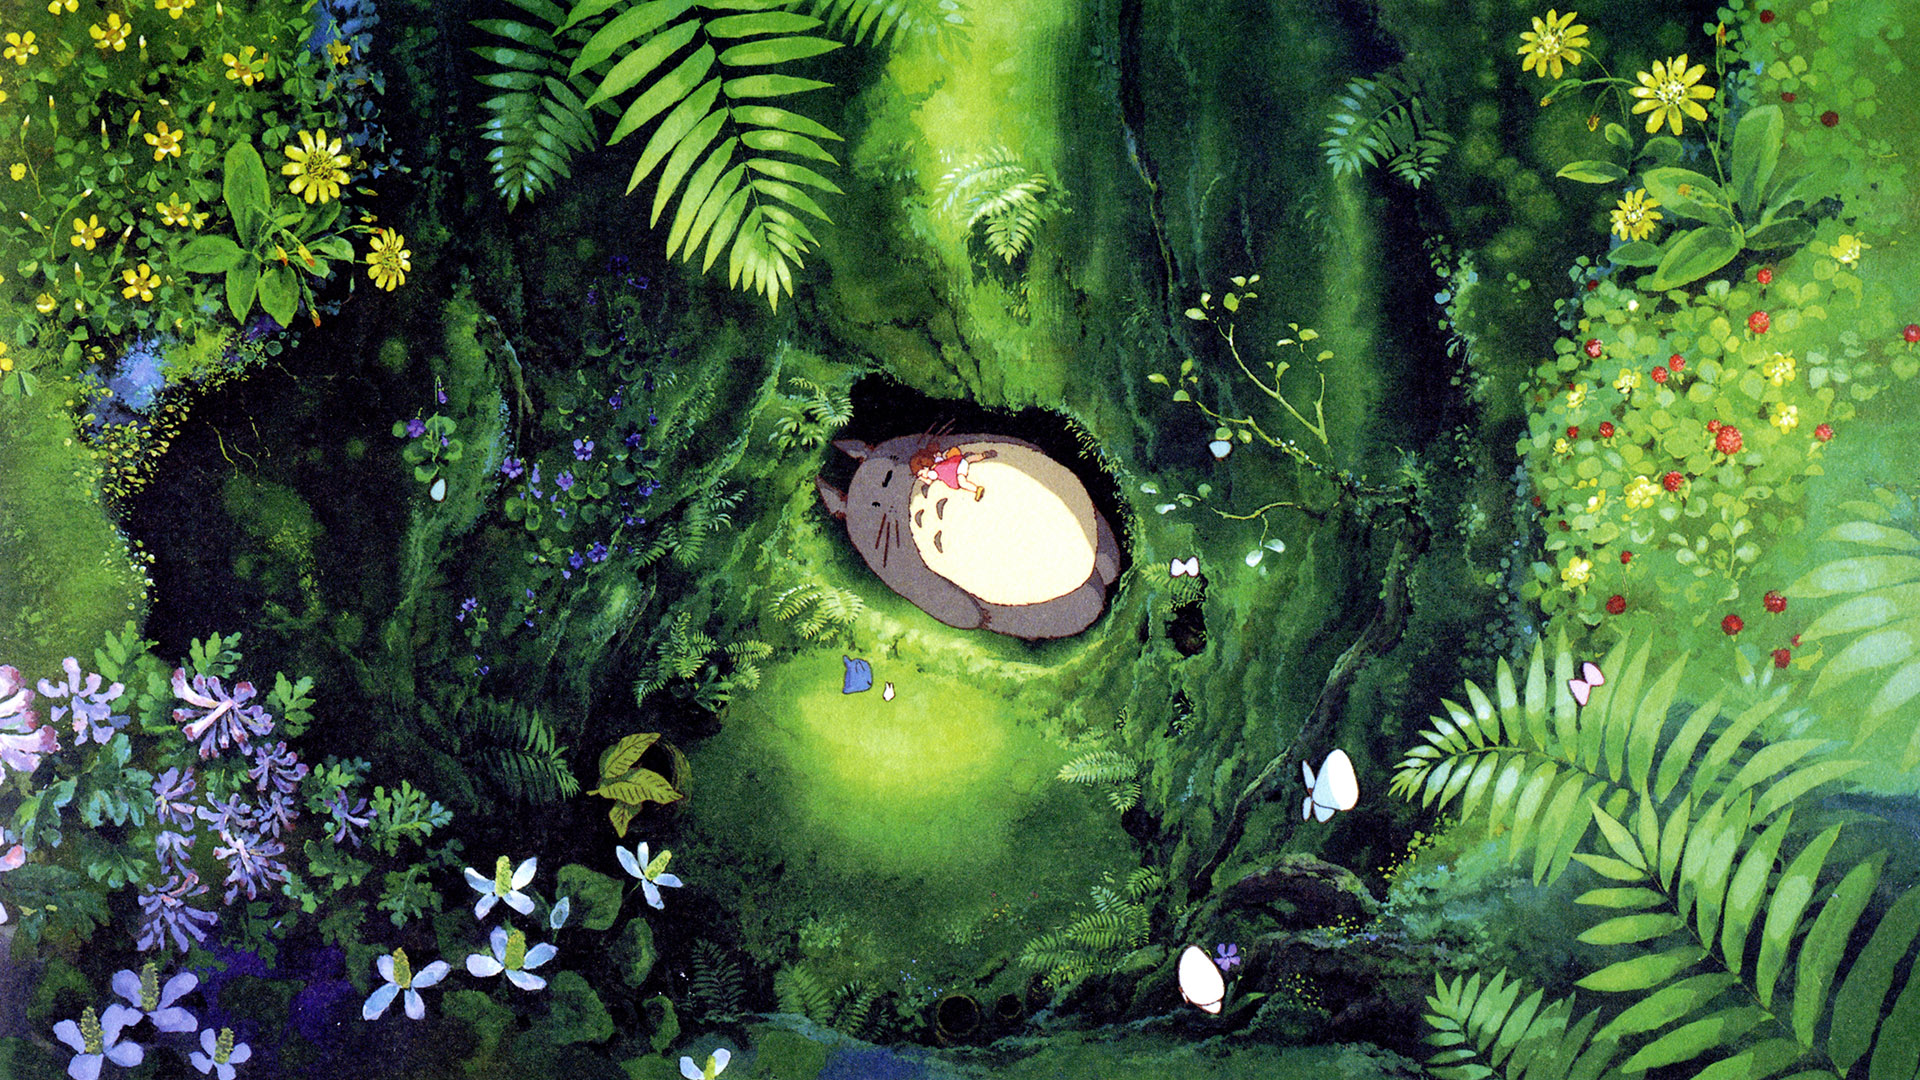 51 My Neighbor Totoro HD Wallpapers | Backgrounds - Wallpaper Abyss